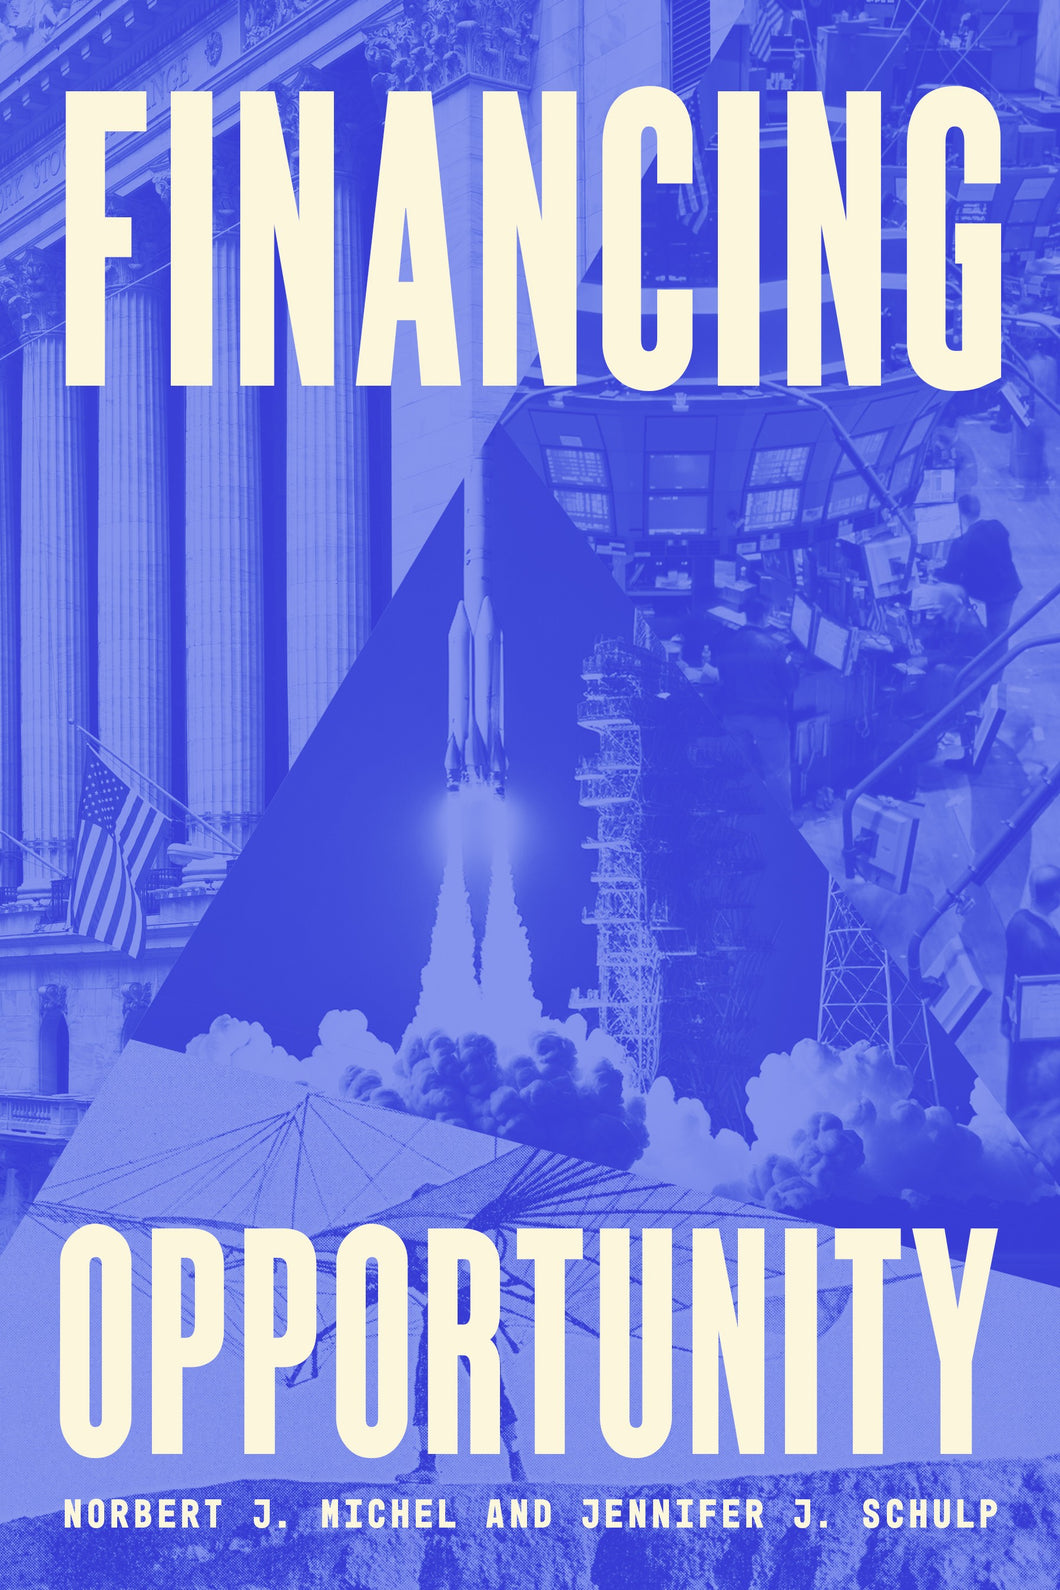 Financing Opportunity: How Financial Markets Have Fueled American Prosperity for More than Two Centuries